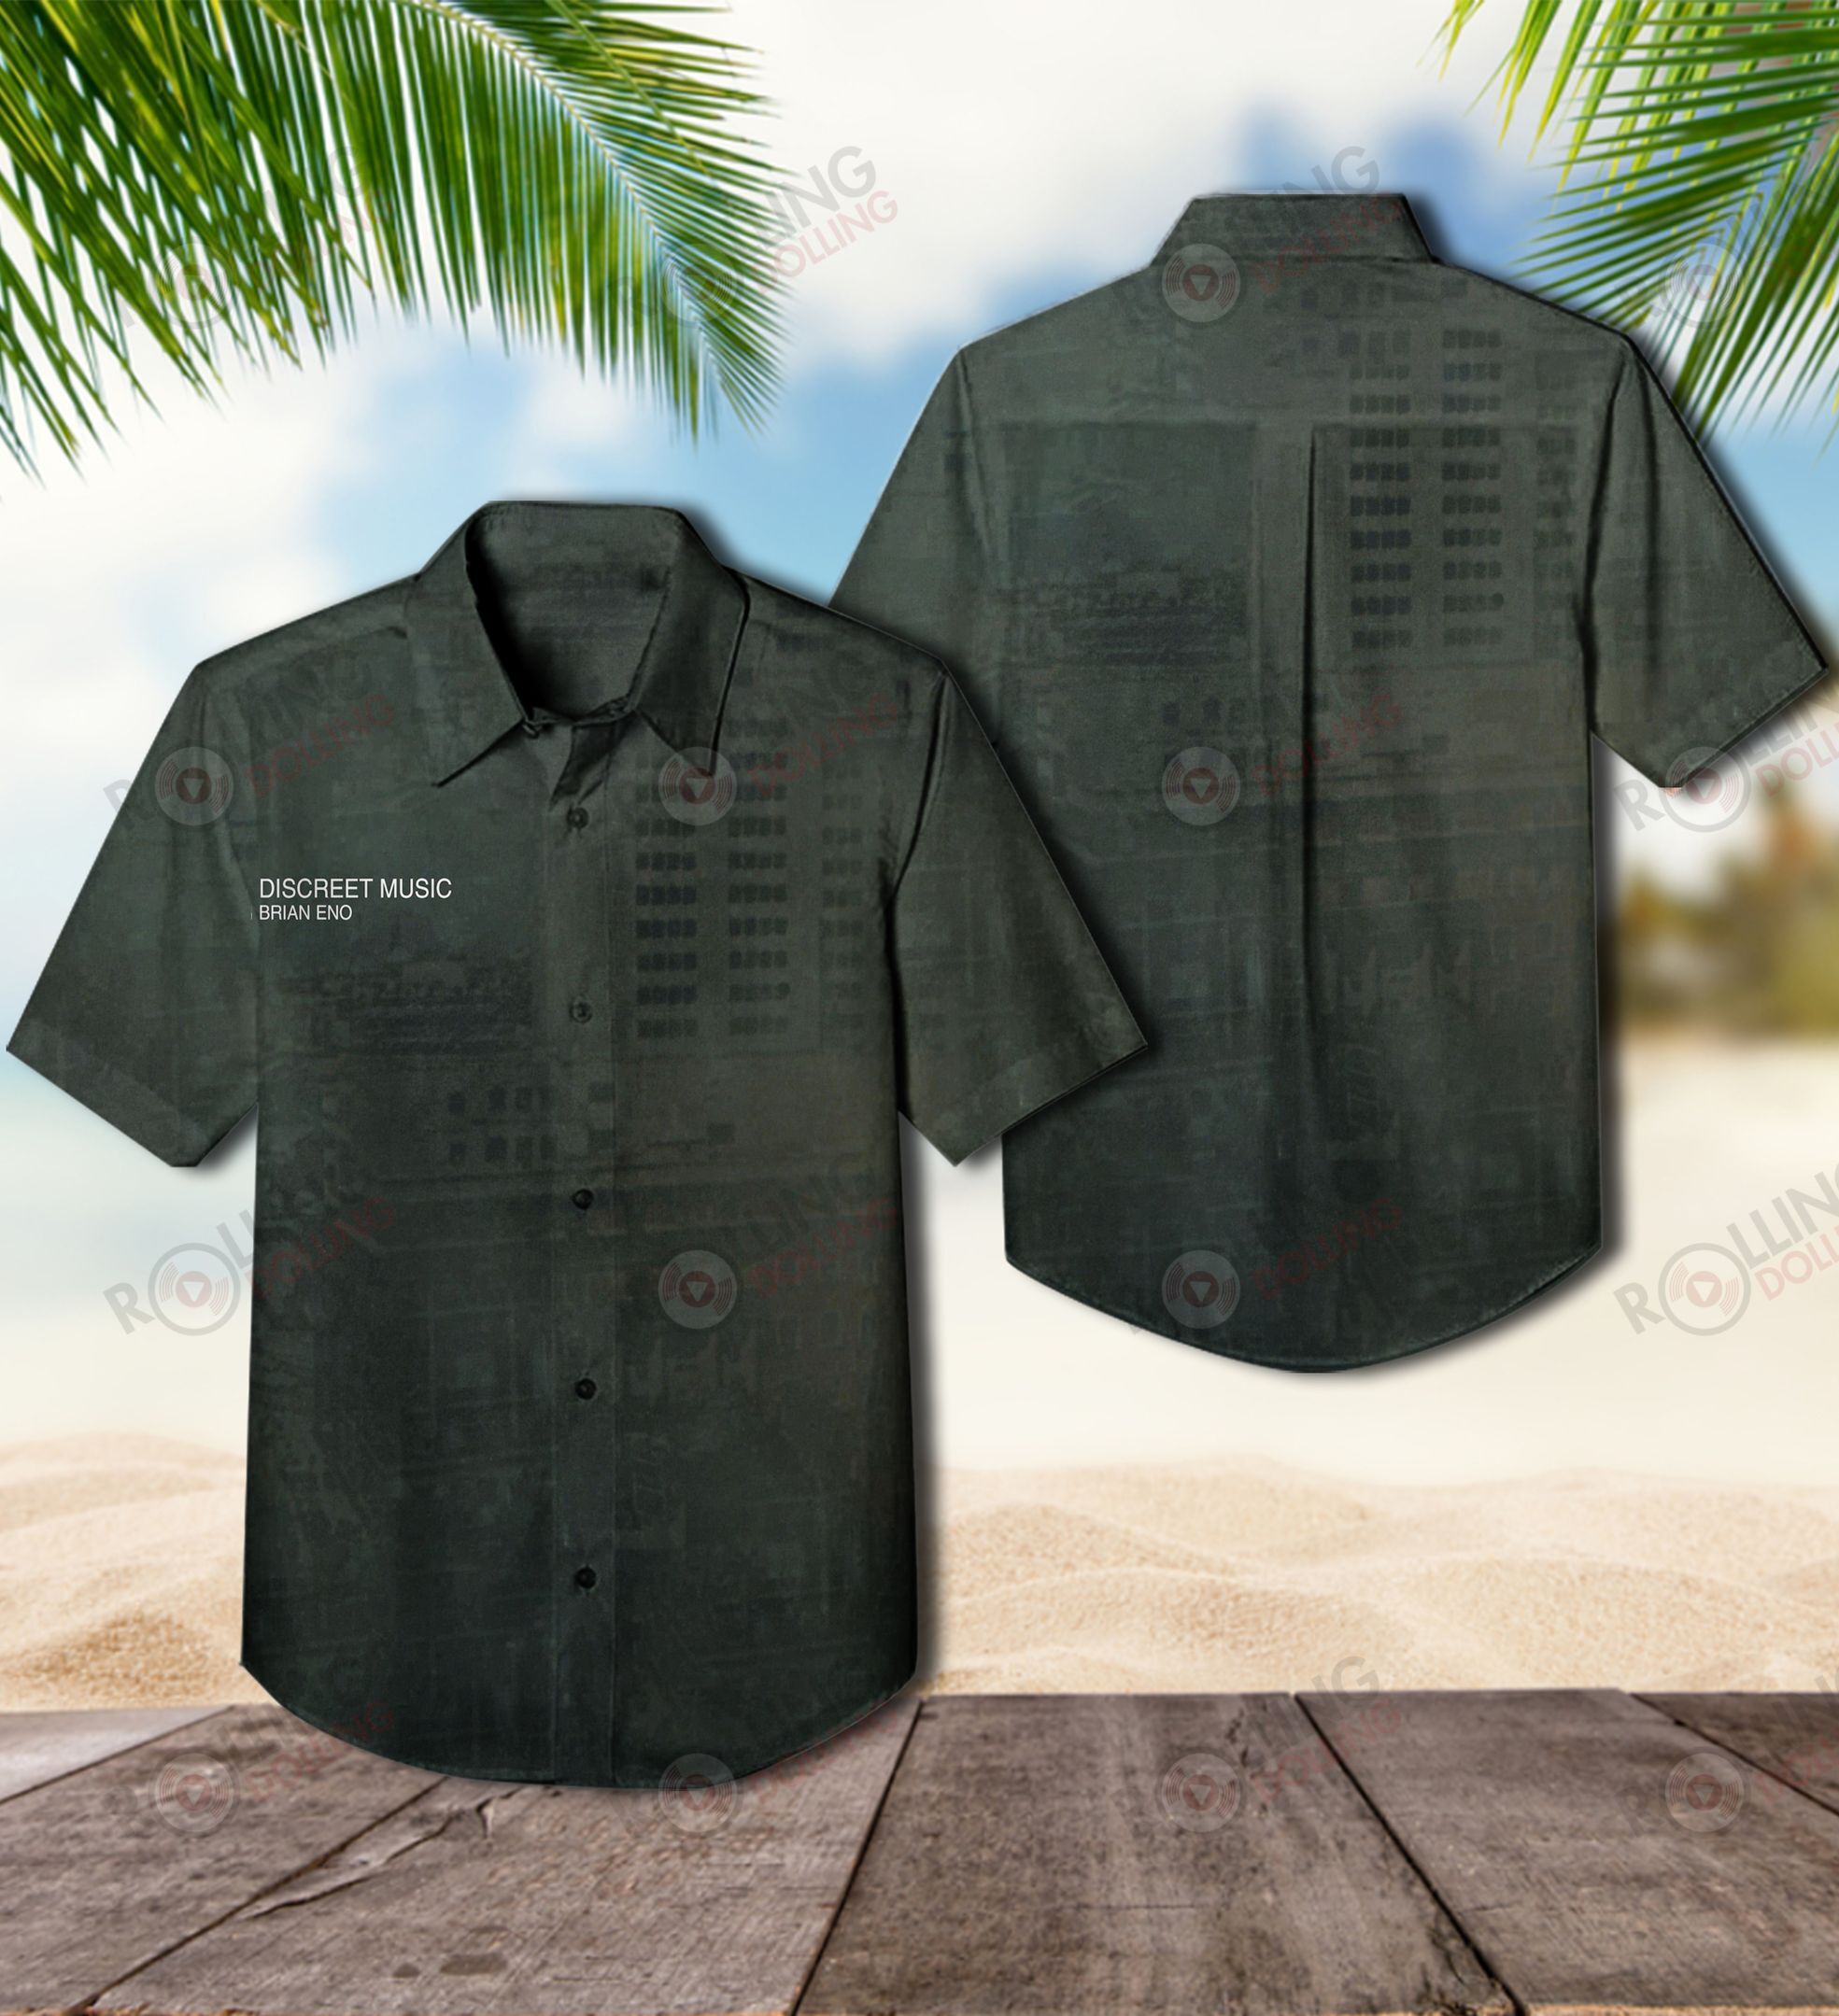 For summer, consider wearing This Amazing Hawaiian Shirt shirt in our store 159